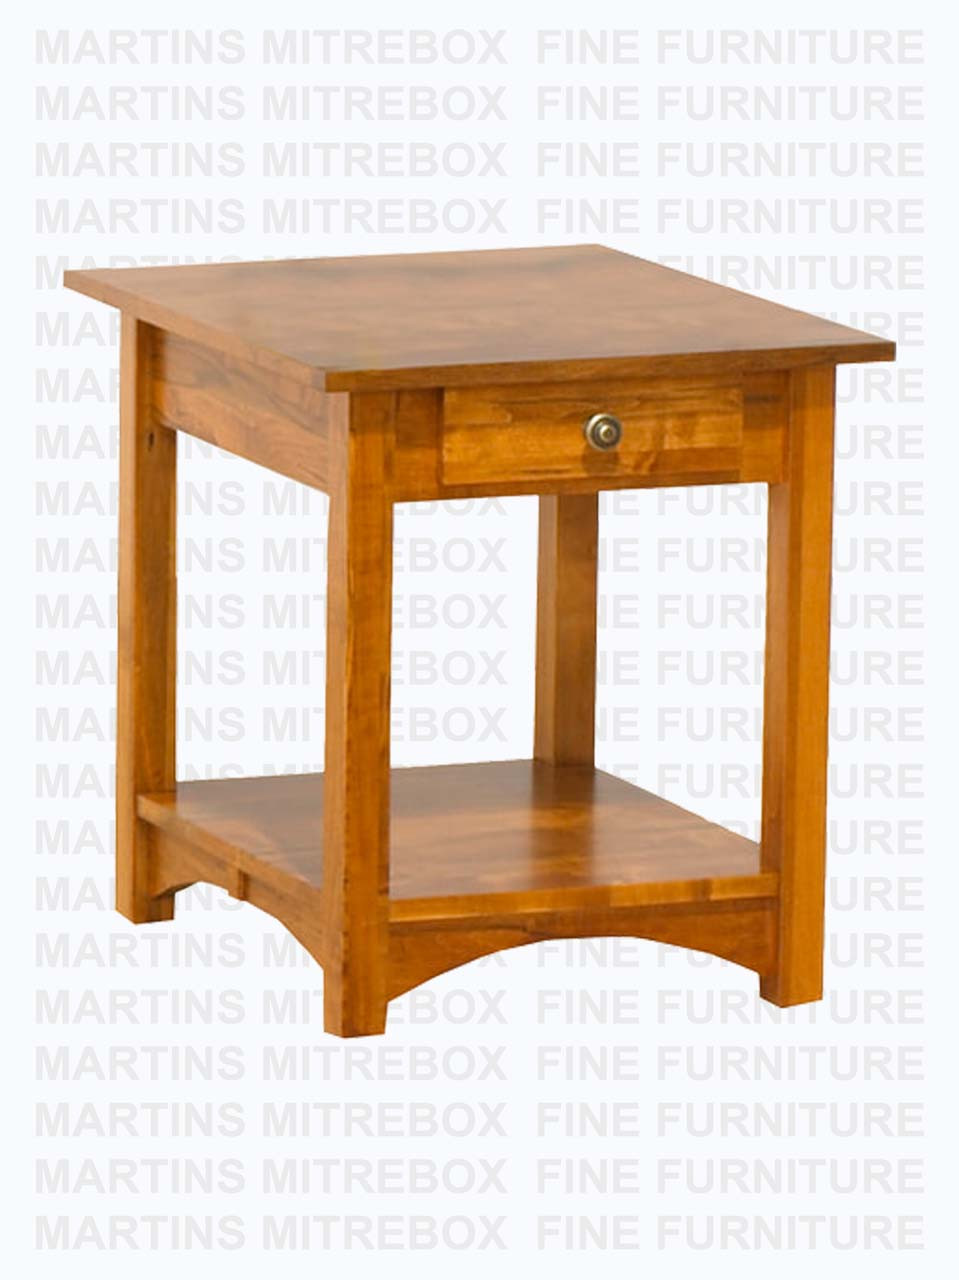 Oak Montana End Table With 1 Drawer And Shelf 24'' Deep x 22'' Wide x 23 11/16' High